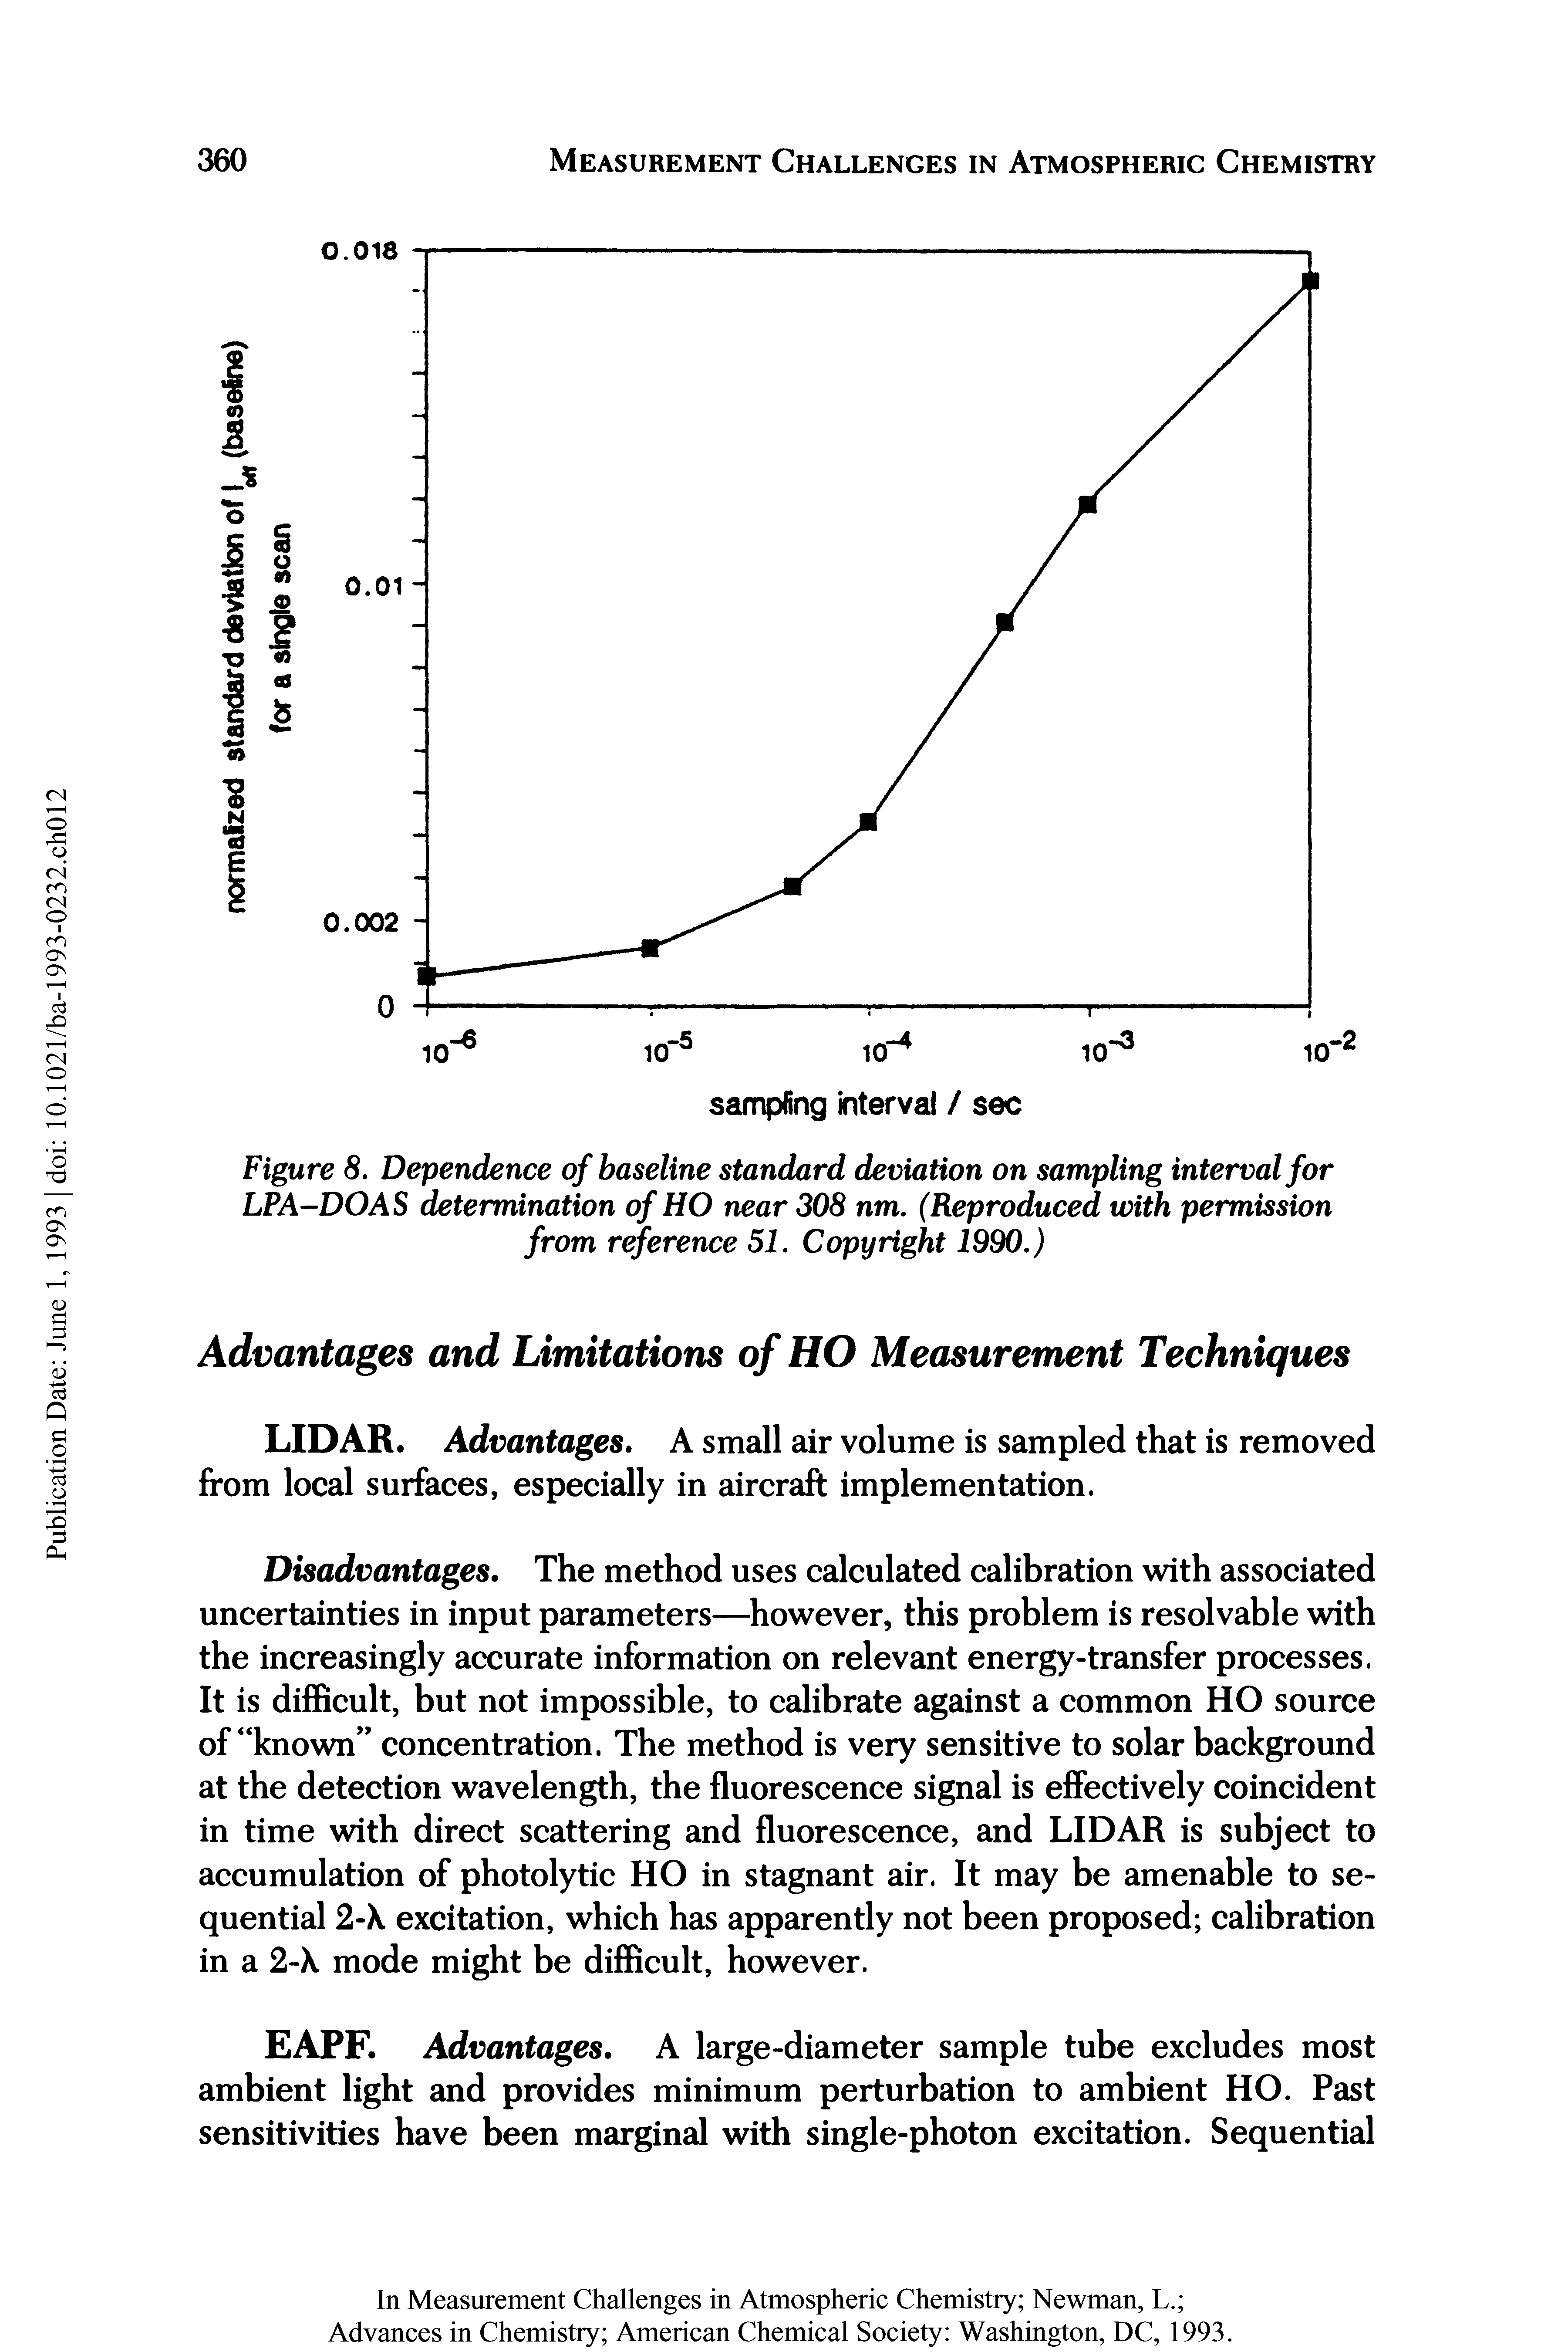 Figure 8. Dependence of baseline standard deviation on sampling interval for LPA-DOAS determination of HO near 308 nm. (Reproduced with permission from reference 51. Copyright 1990.)...